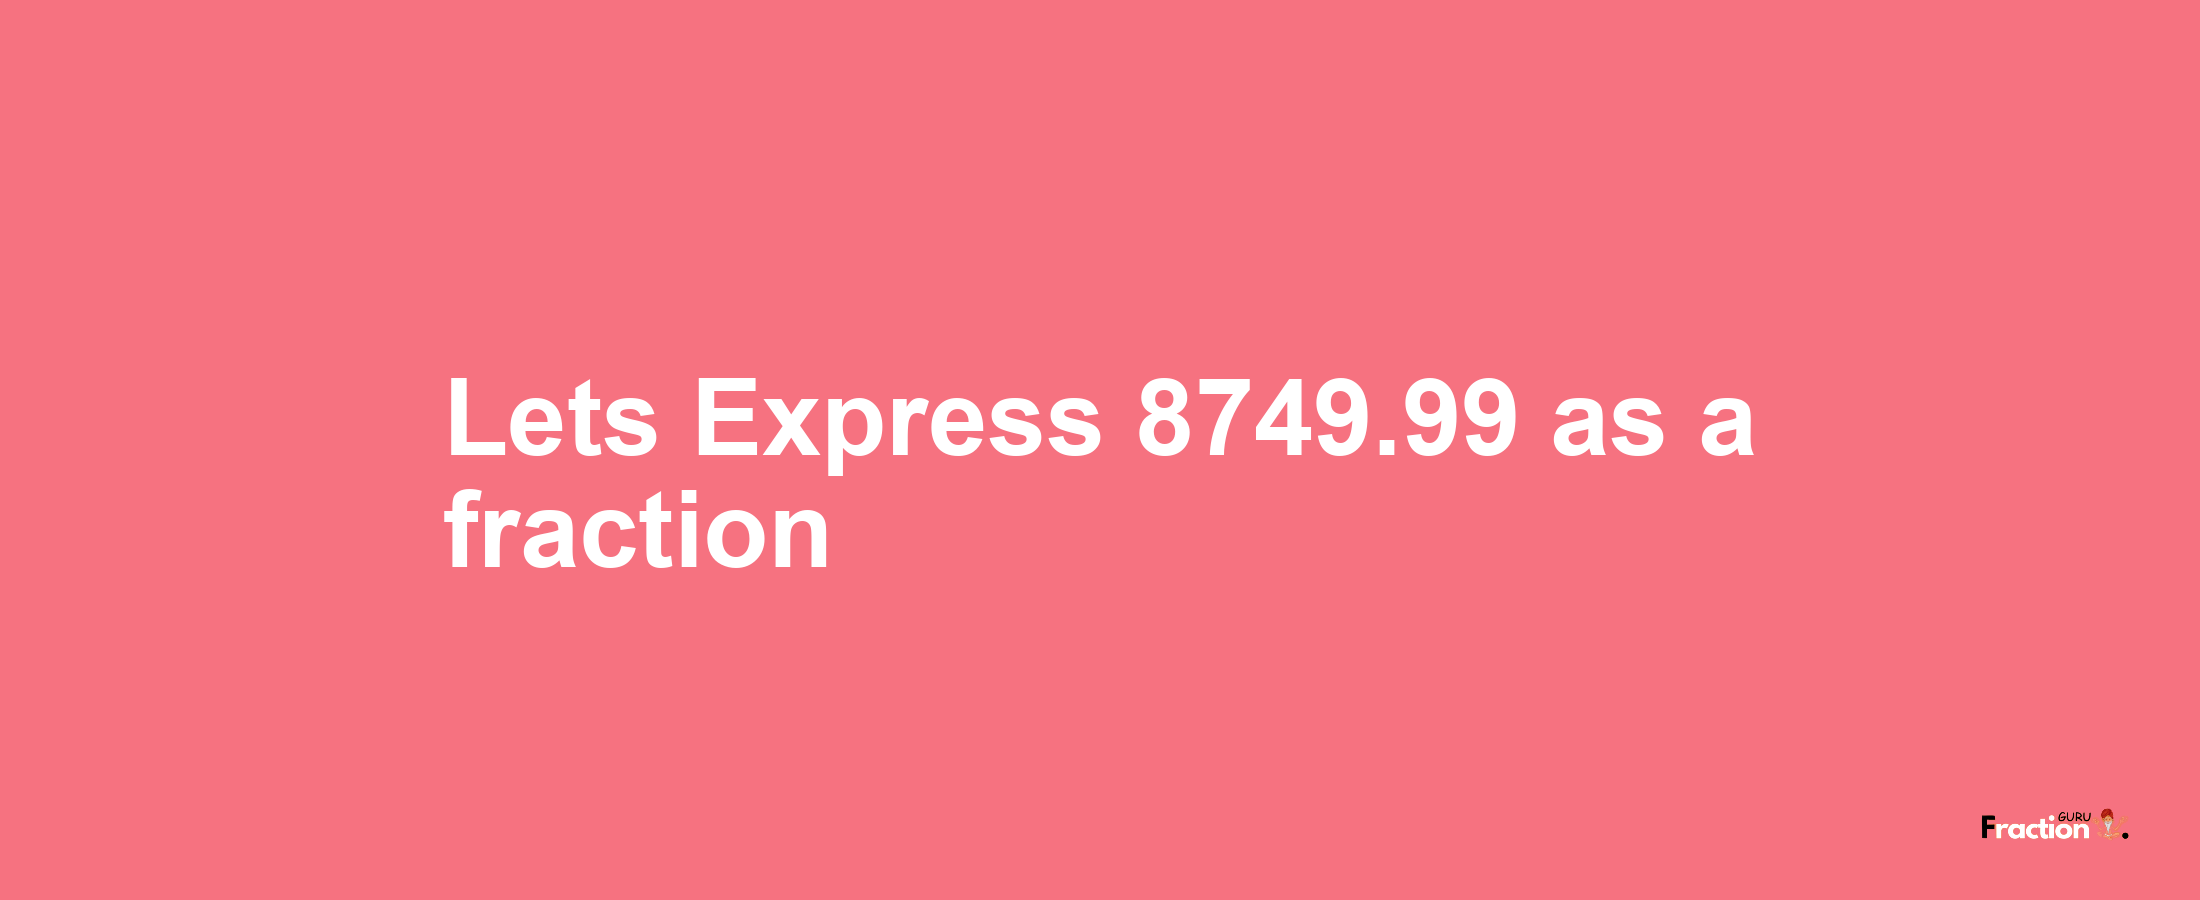 Lets Express 8749.99 as afraction